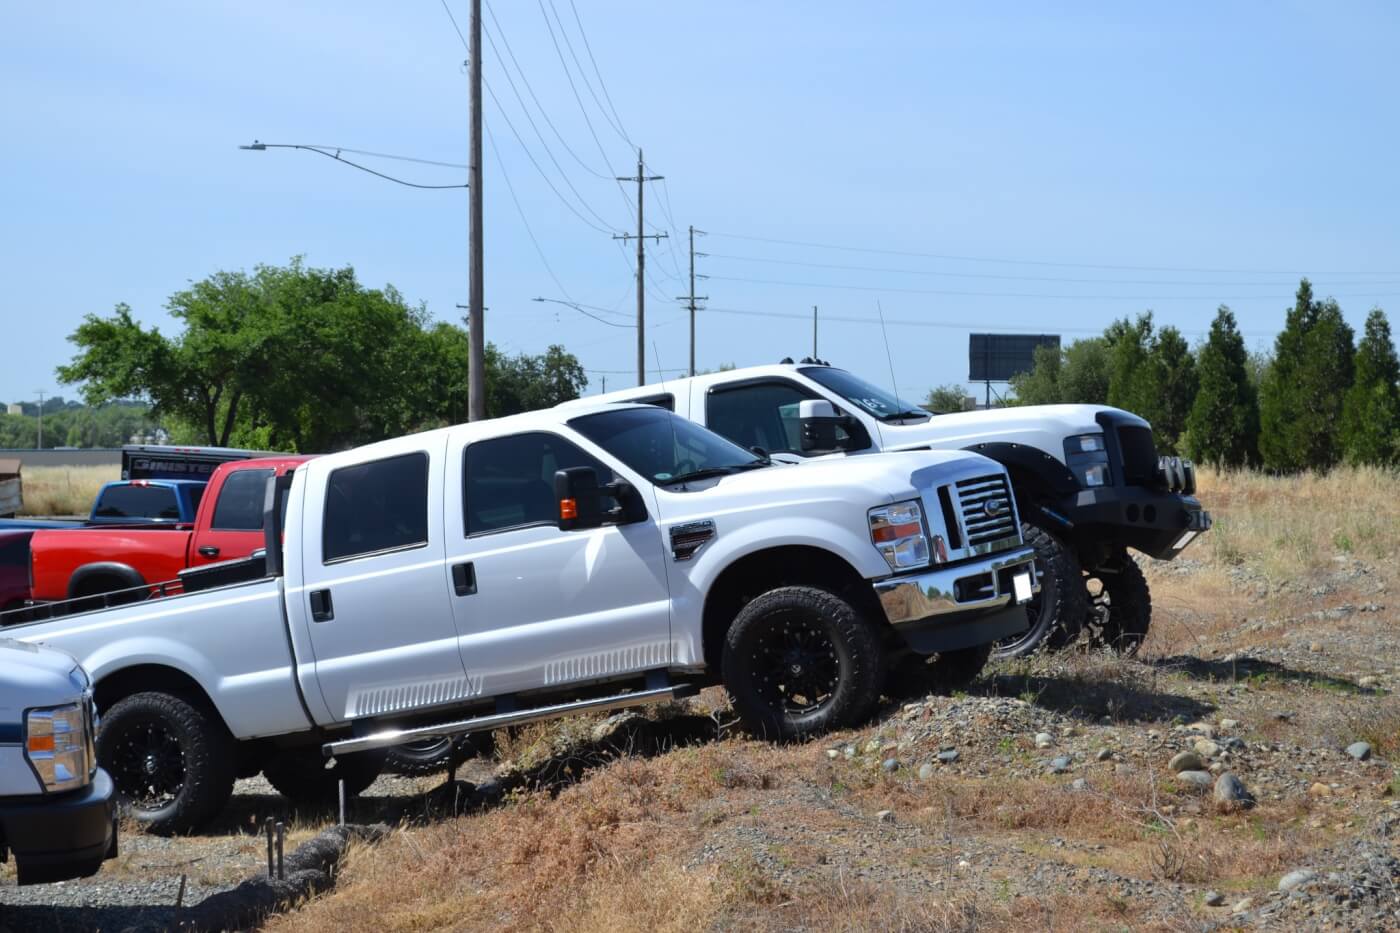 Overflow parking is easy at a diesel event. We saw plenty of diesels climbing the berms outside MPD's shop.